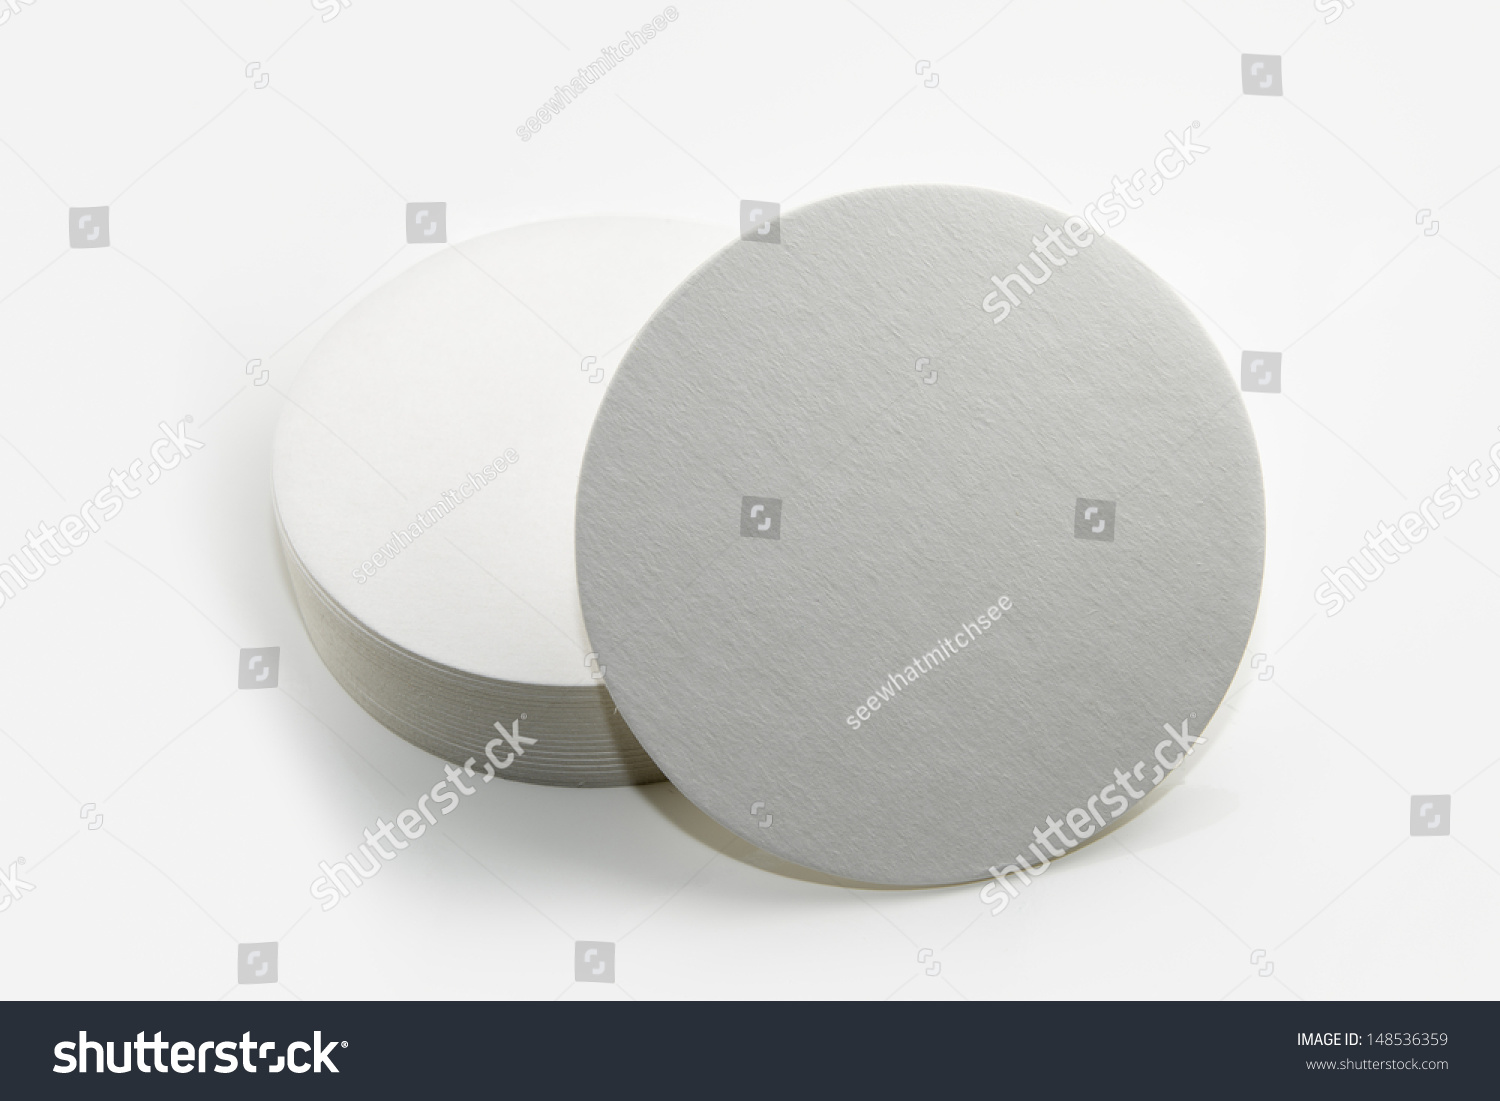 Stack of new beer coasters isolated on a white background. Add your own design or logo. #148536359